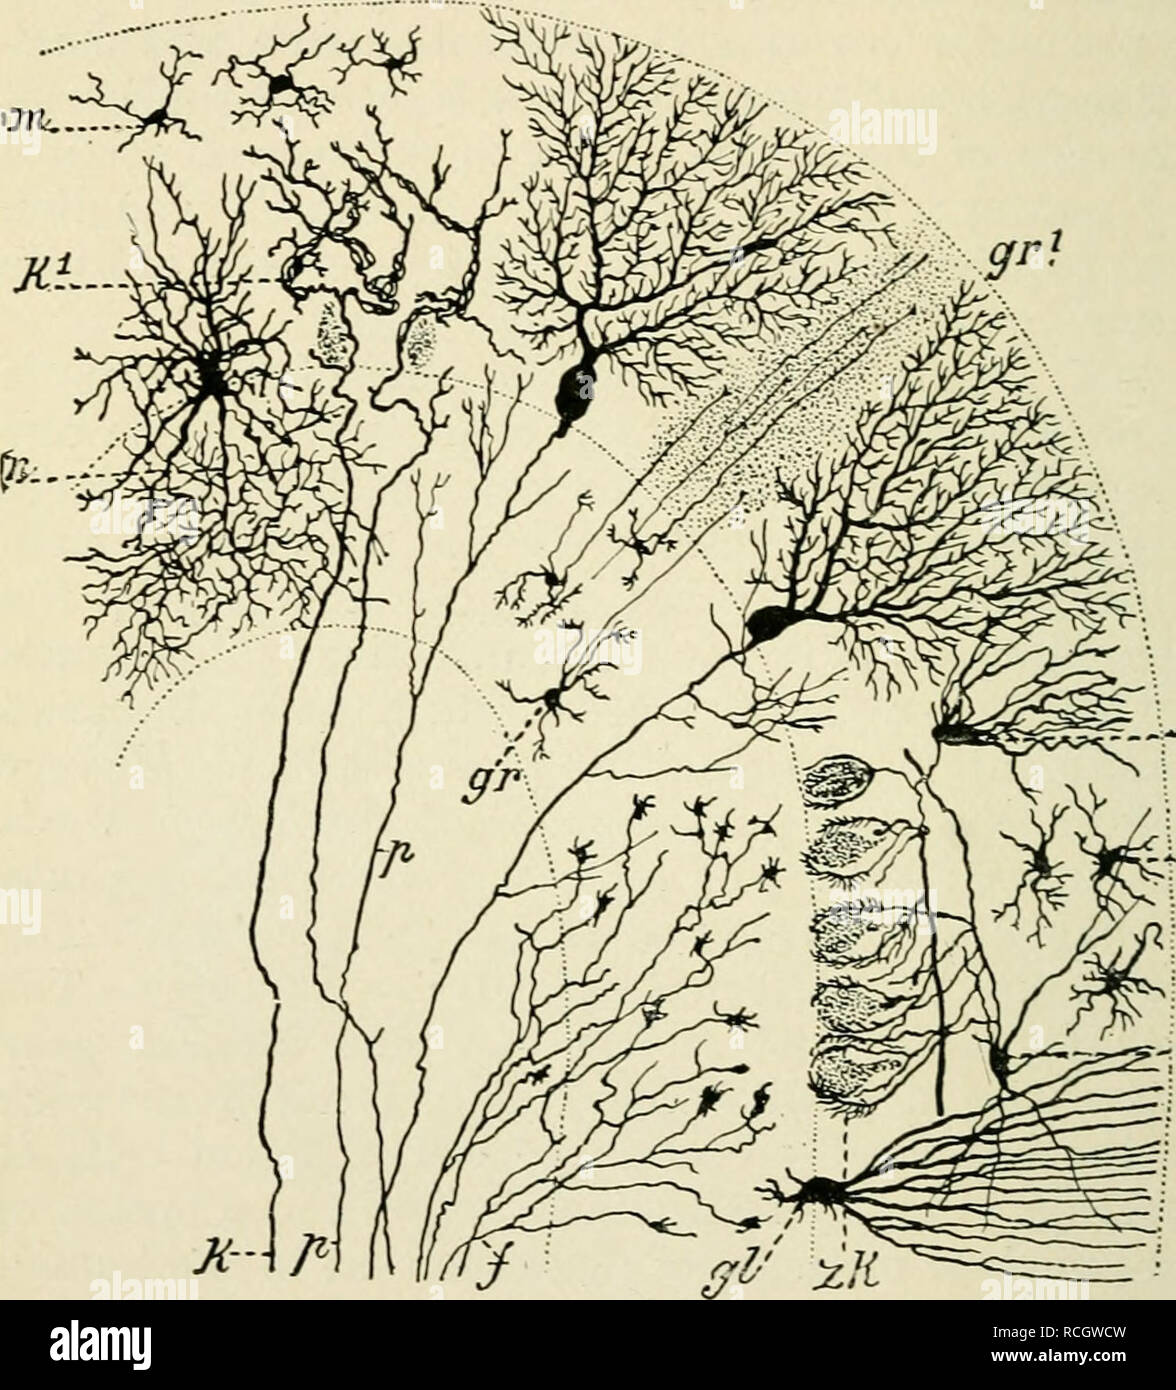 . Elements of histology. Histology. 240 Elements of Histology. the direction of a lamina. Purkinje first, they are extensive dendritic ramification, viewed transversely, Considering the cells of seen to possess a very. '^jn iTa â ml Fig. 150.âScheme of the Connectiou of the Cells in the Superficial Grey Substance of the Cerebellum. (After KoUiker.) p, Xeuraxons of Purkinje's cells with collaterals : k, tendril-like fibres with k^ their terminations; gU glia cells; /, nio^s fibres; m, small cells of the molecular layer; vi^, larare cells of the same layer (basket cells) forming synapses roun Stock Photo